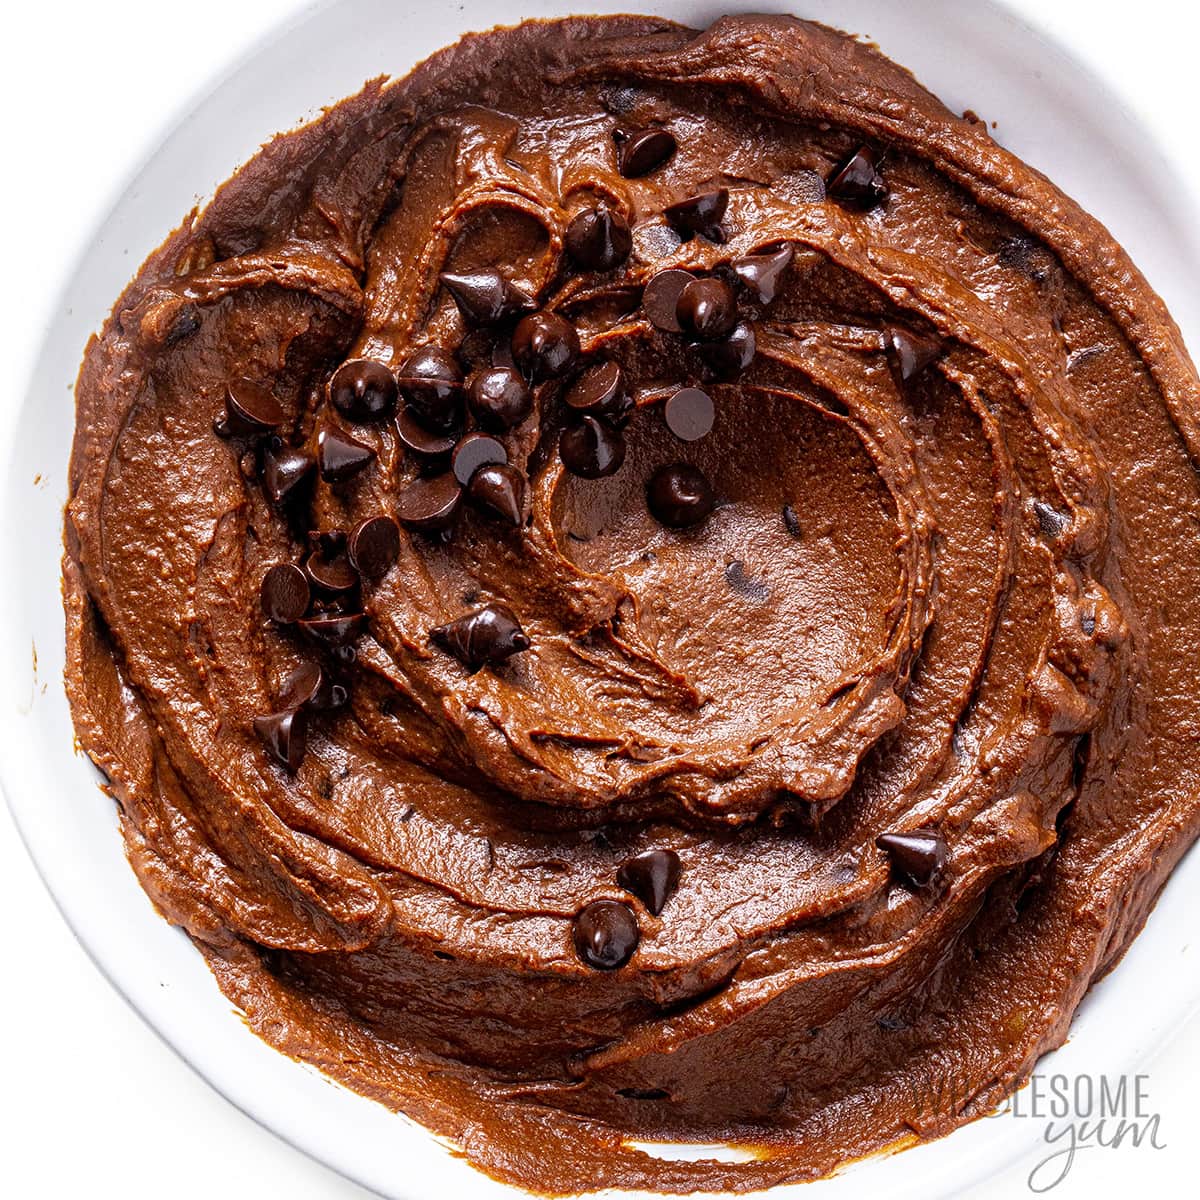 Finished chocolate hummus dip in a bowl.